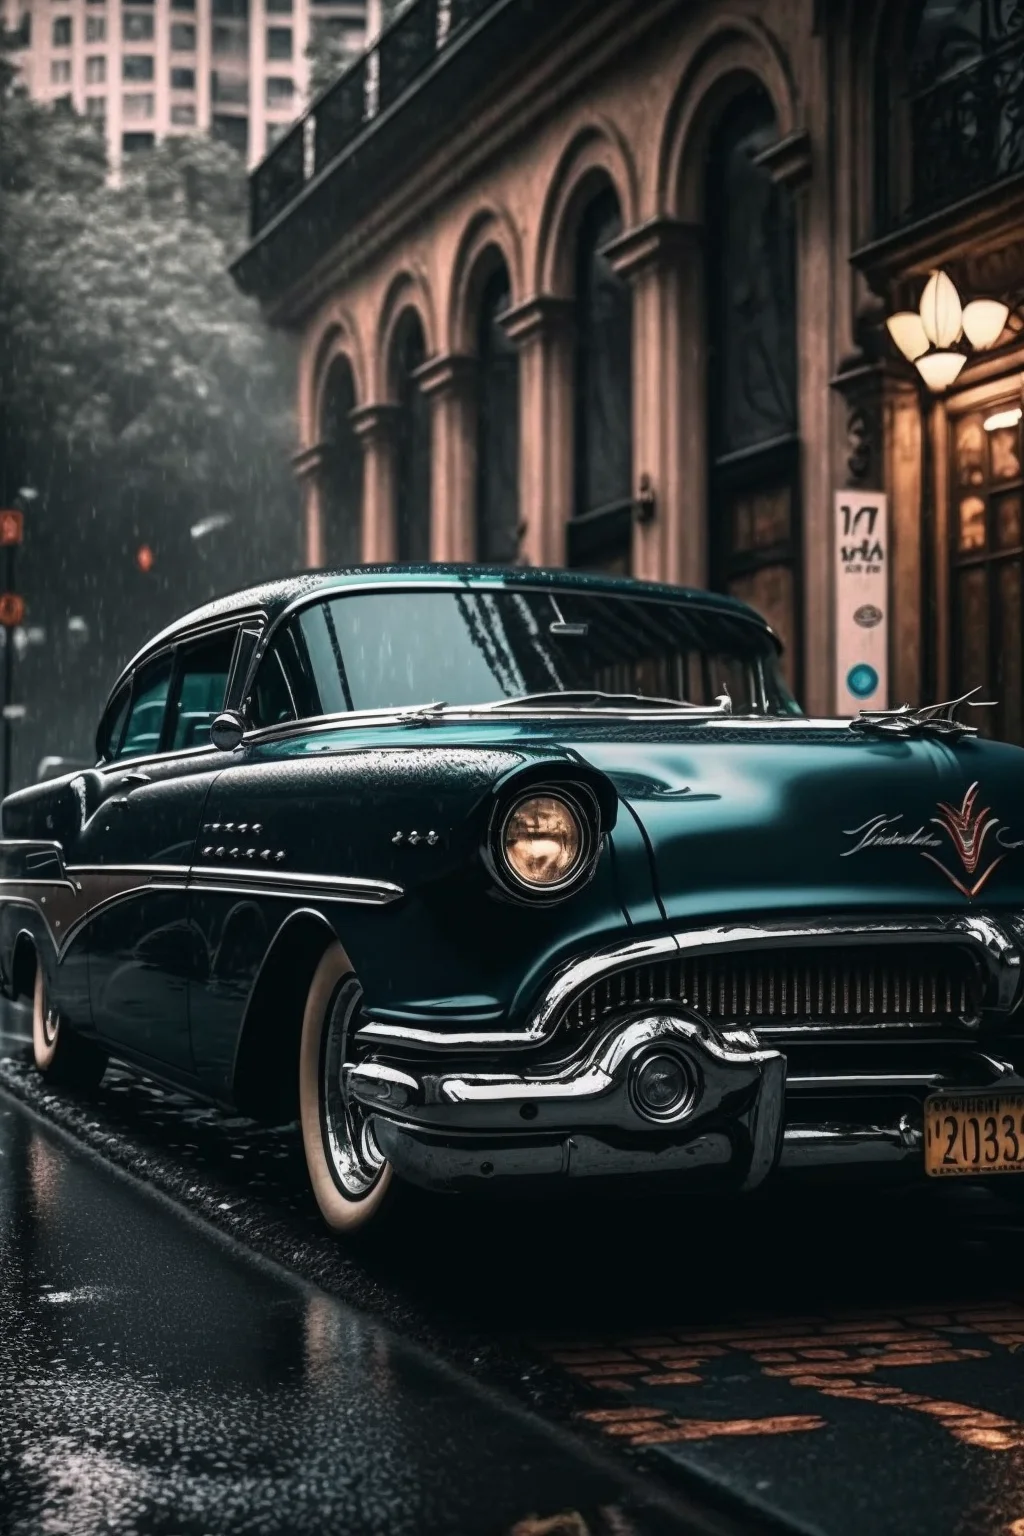 A classic car parked on the side of an old city street - Cars